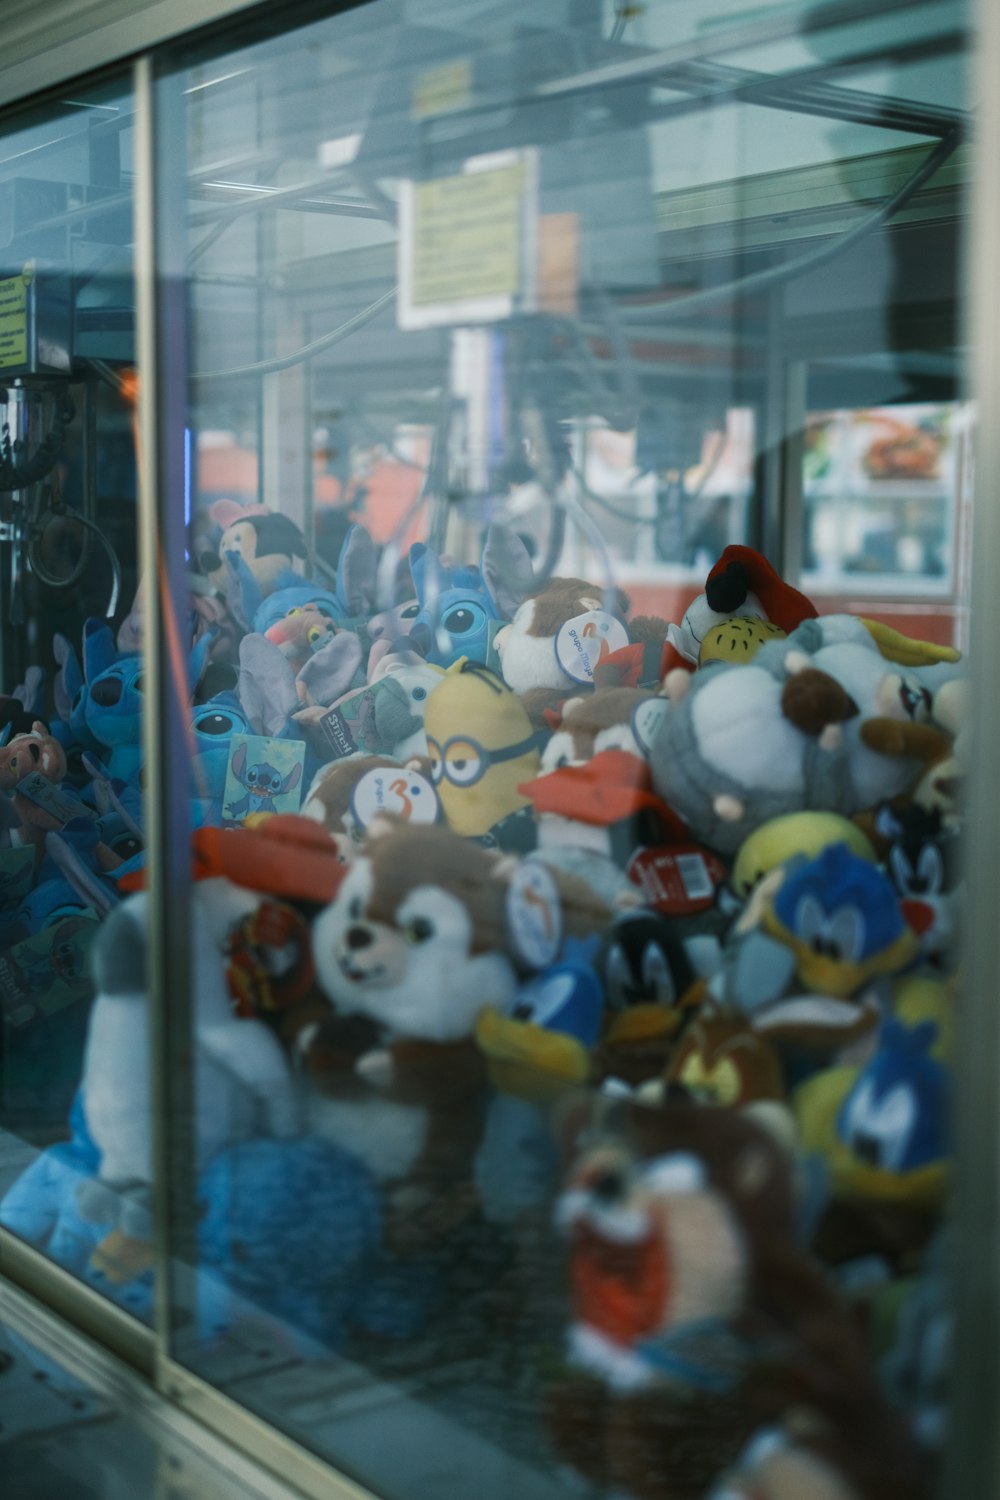 a bunch of stuffed animals in a store window